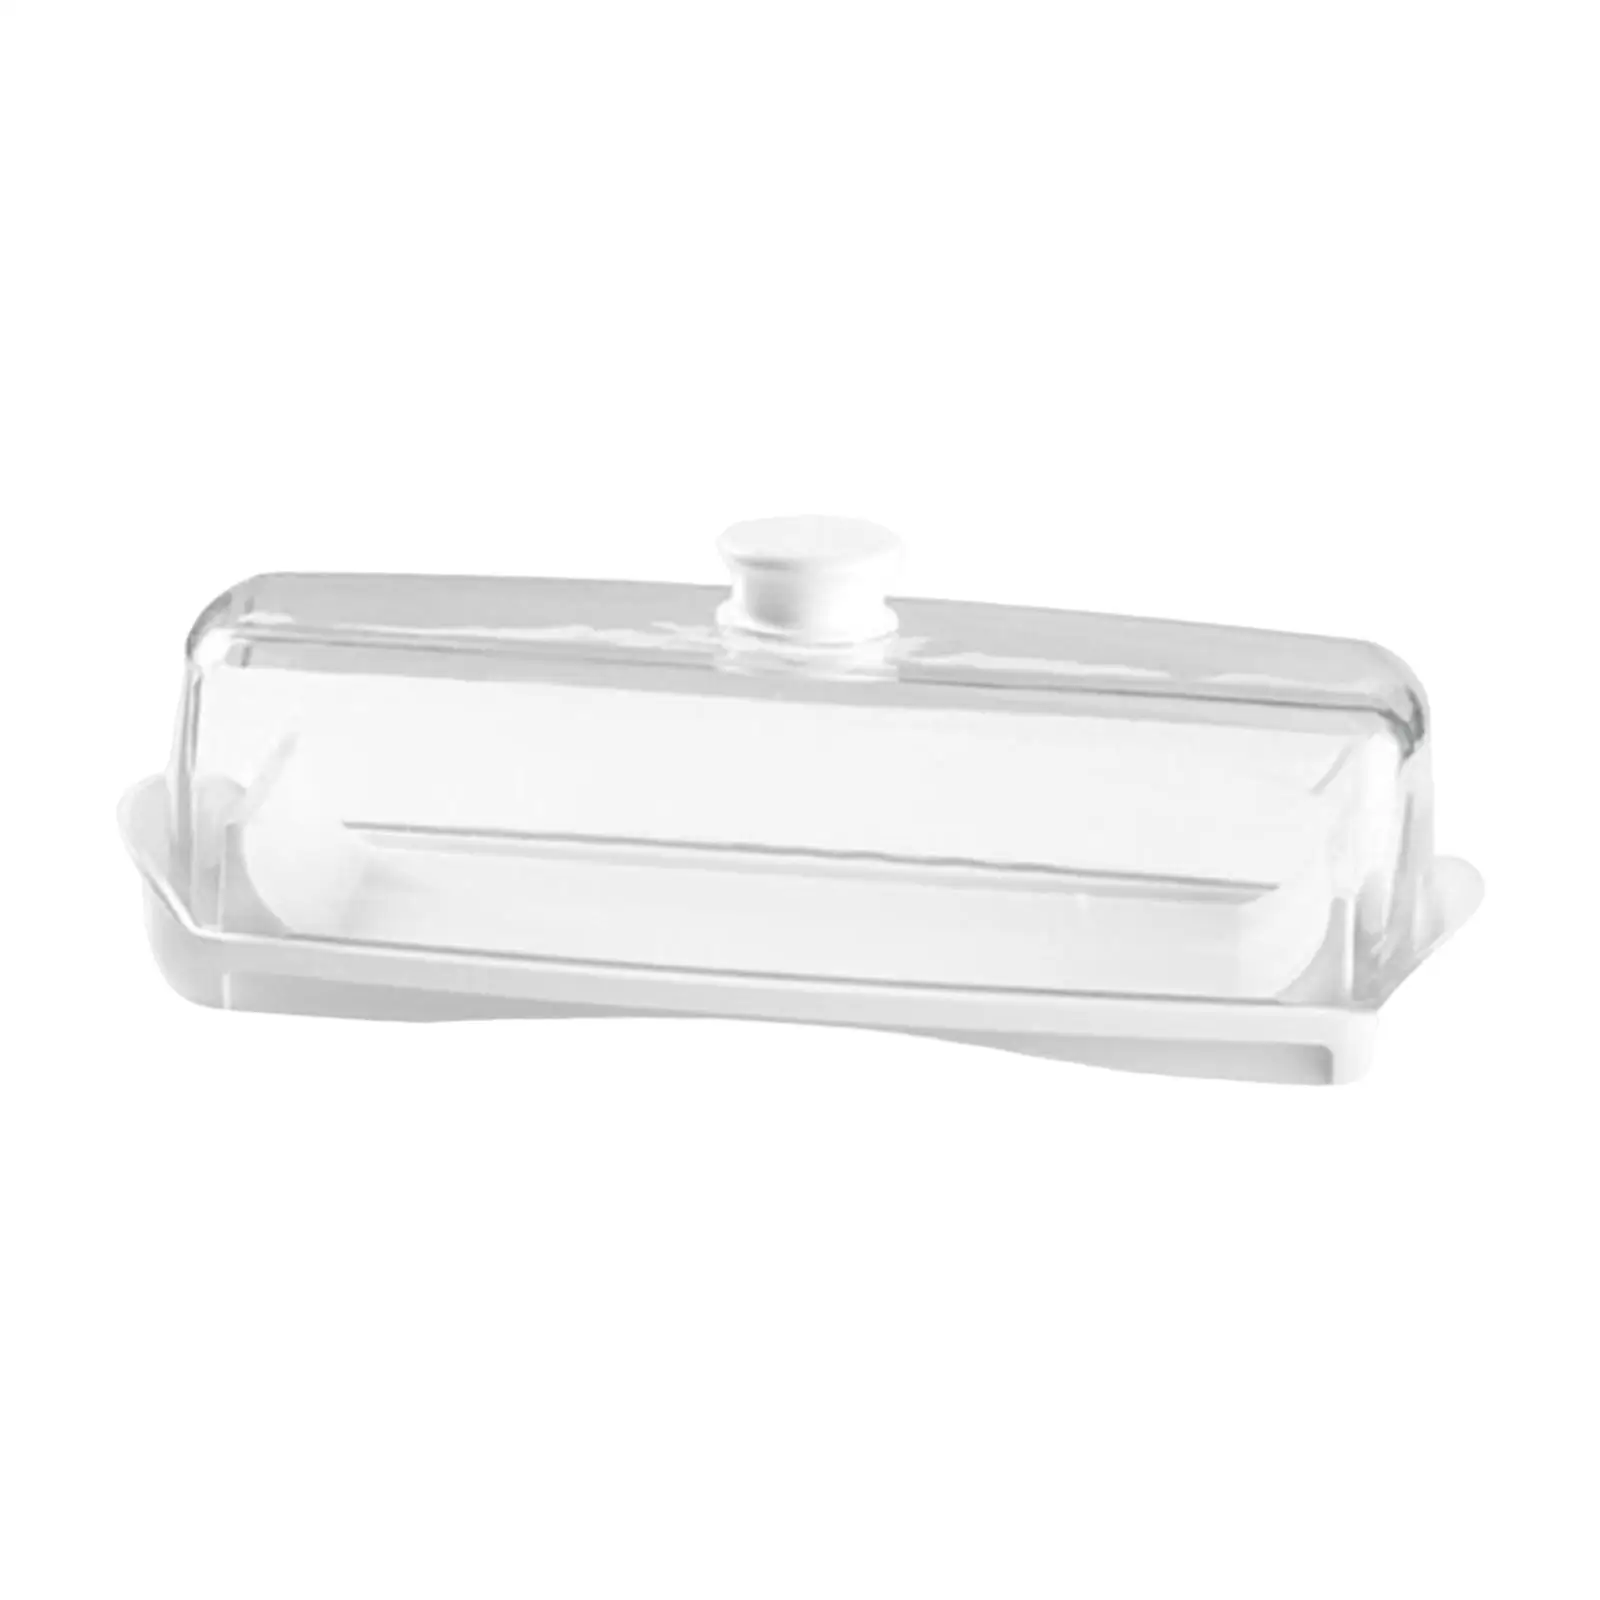 Household Butter Dish Kitchen Organization Butter Holder for Dining Room